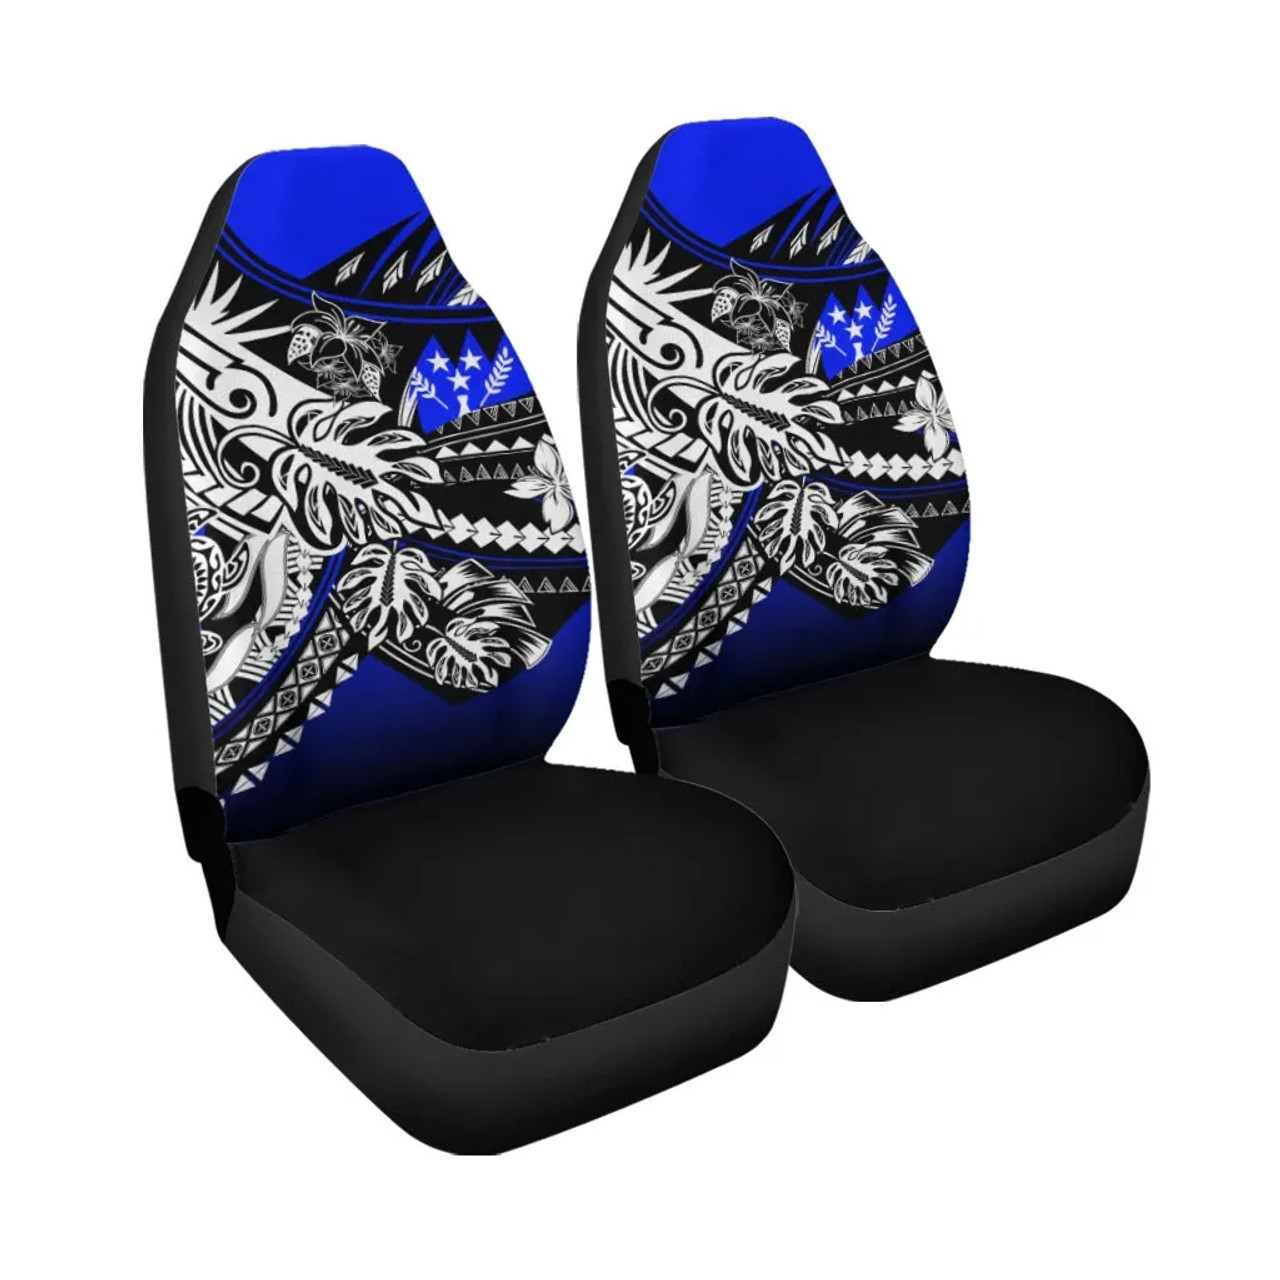 Kosrae State Car Seat Cover - The Flow OF Ocean Blue Color